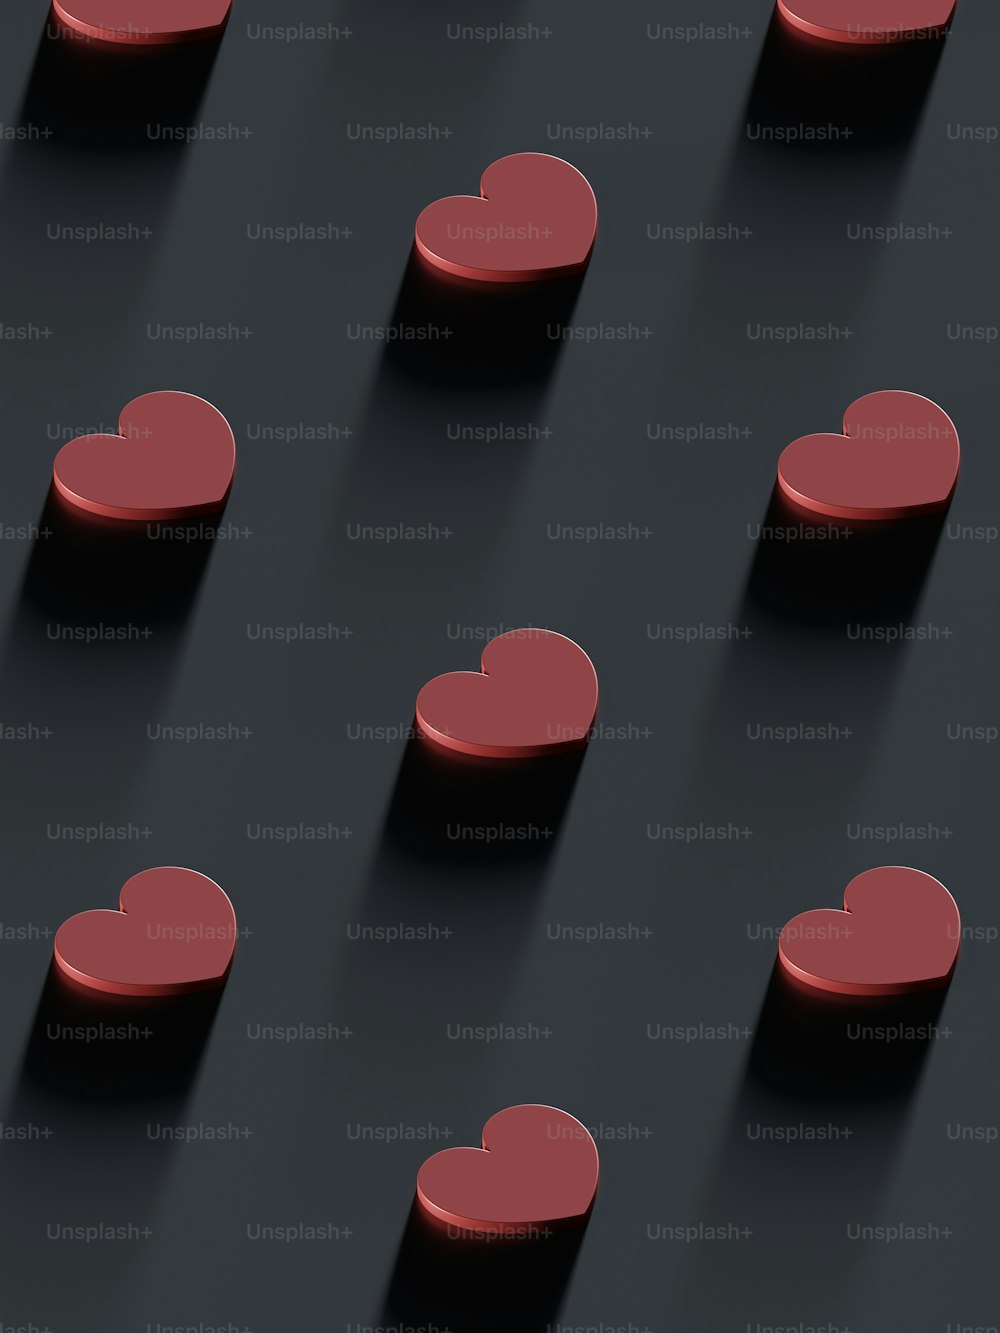 a group of red hearts sitting on top of a black surface